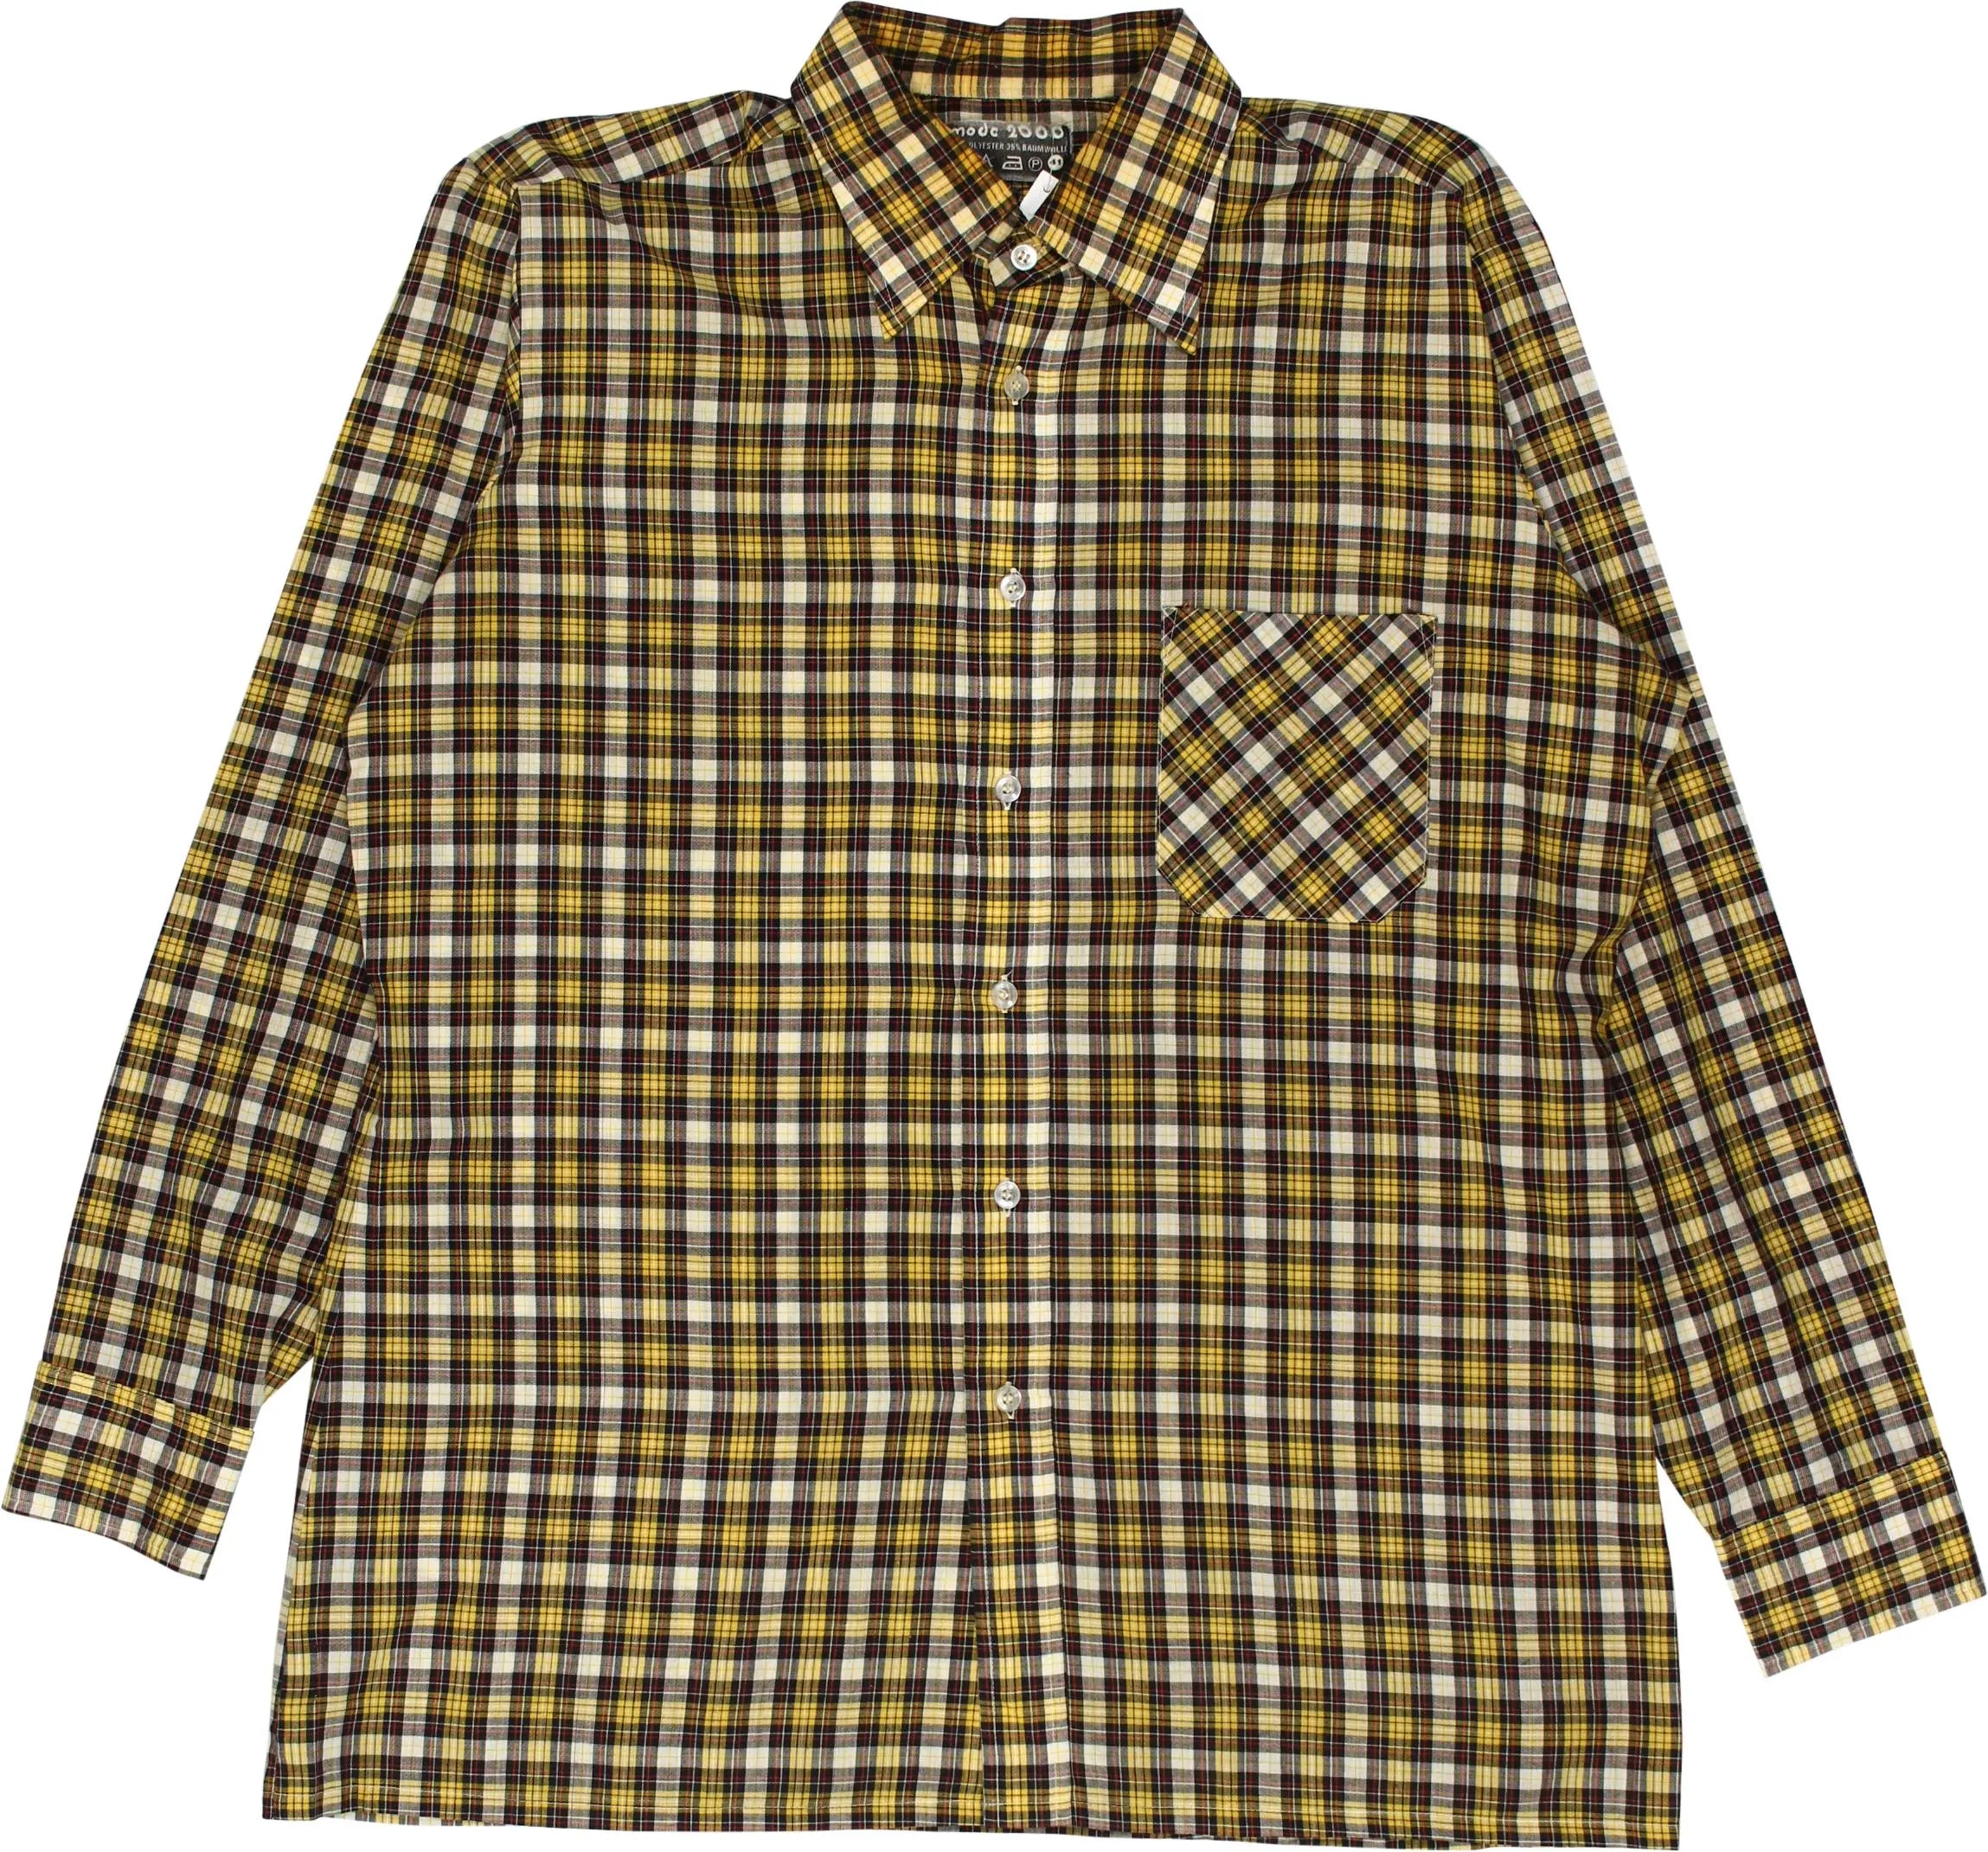 Mode 2000 - 70s Checkered Shirt- ThriftTale.com - Vintage and second handclothing